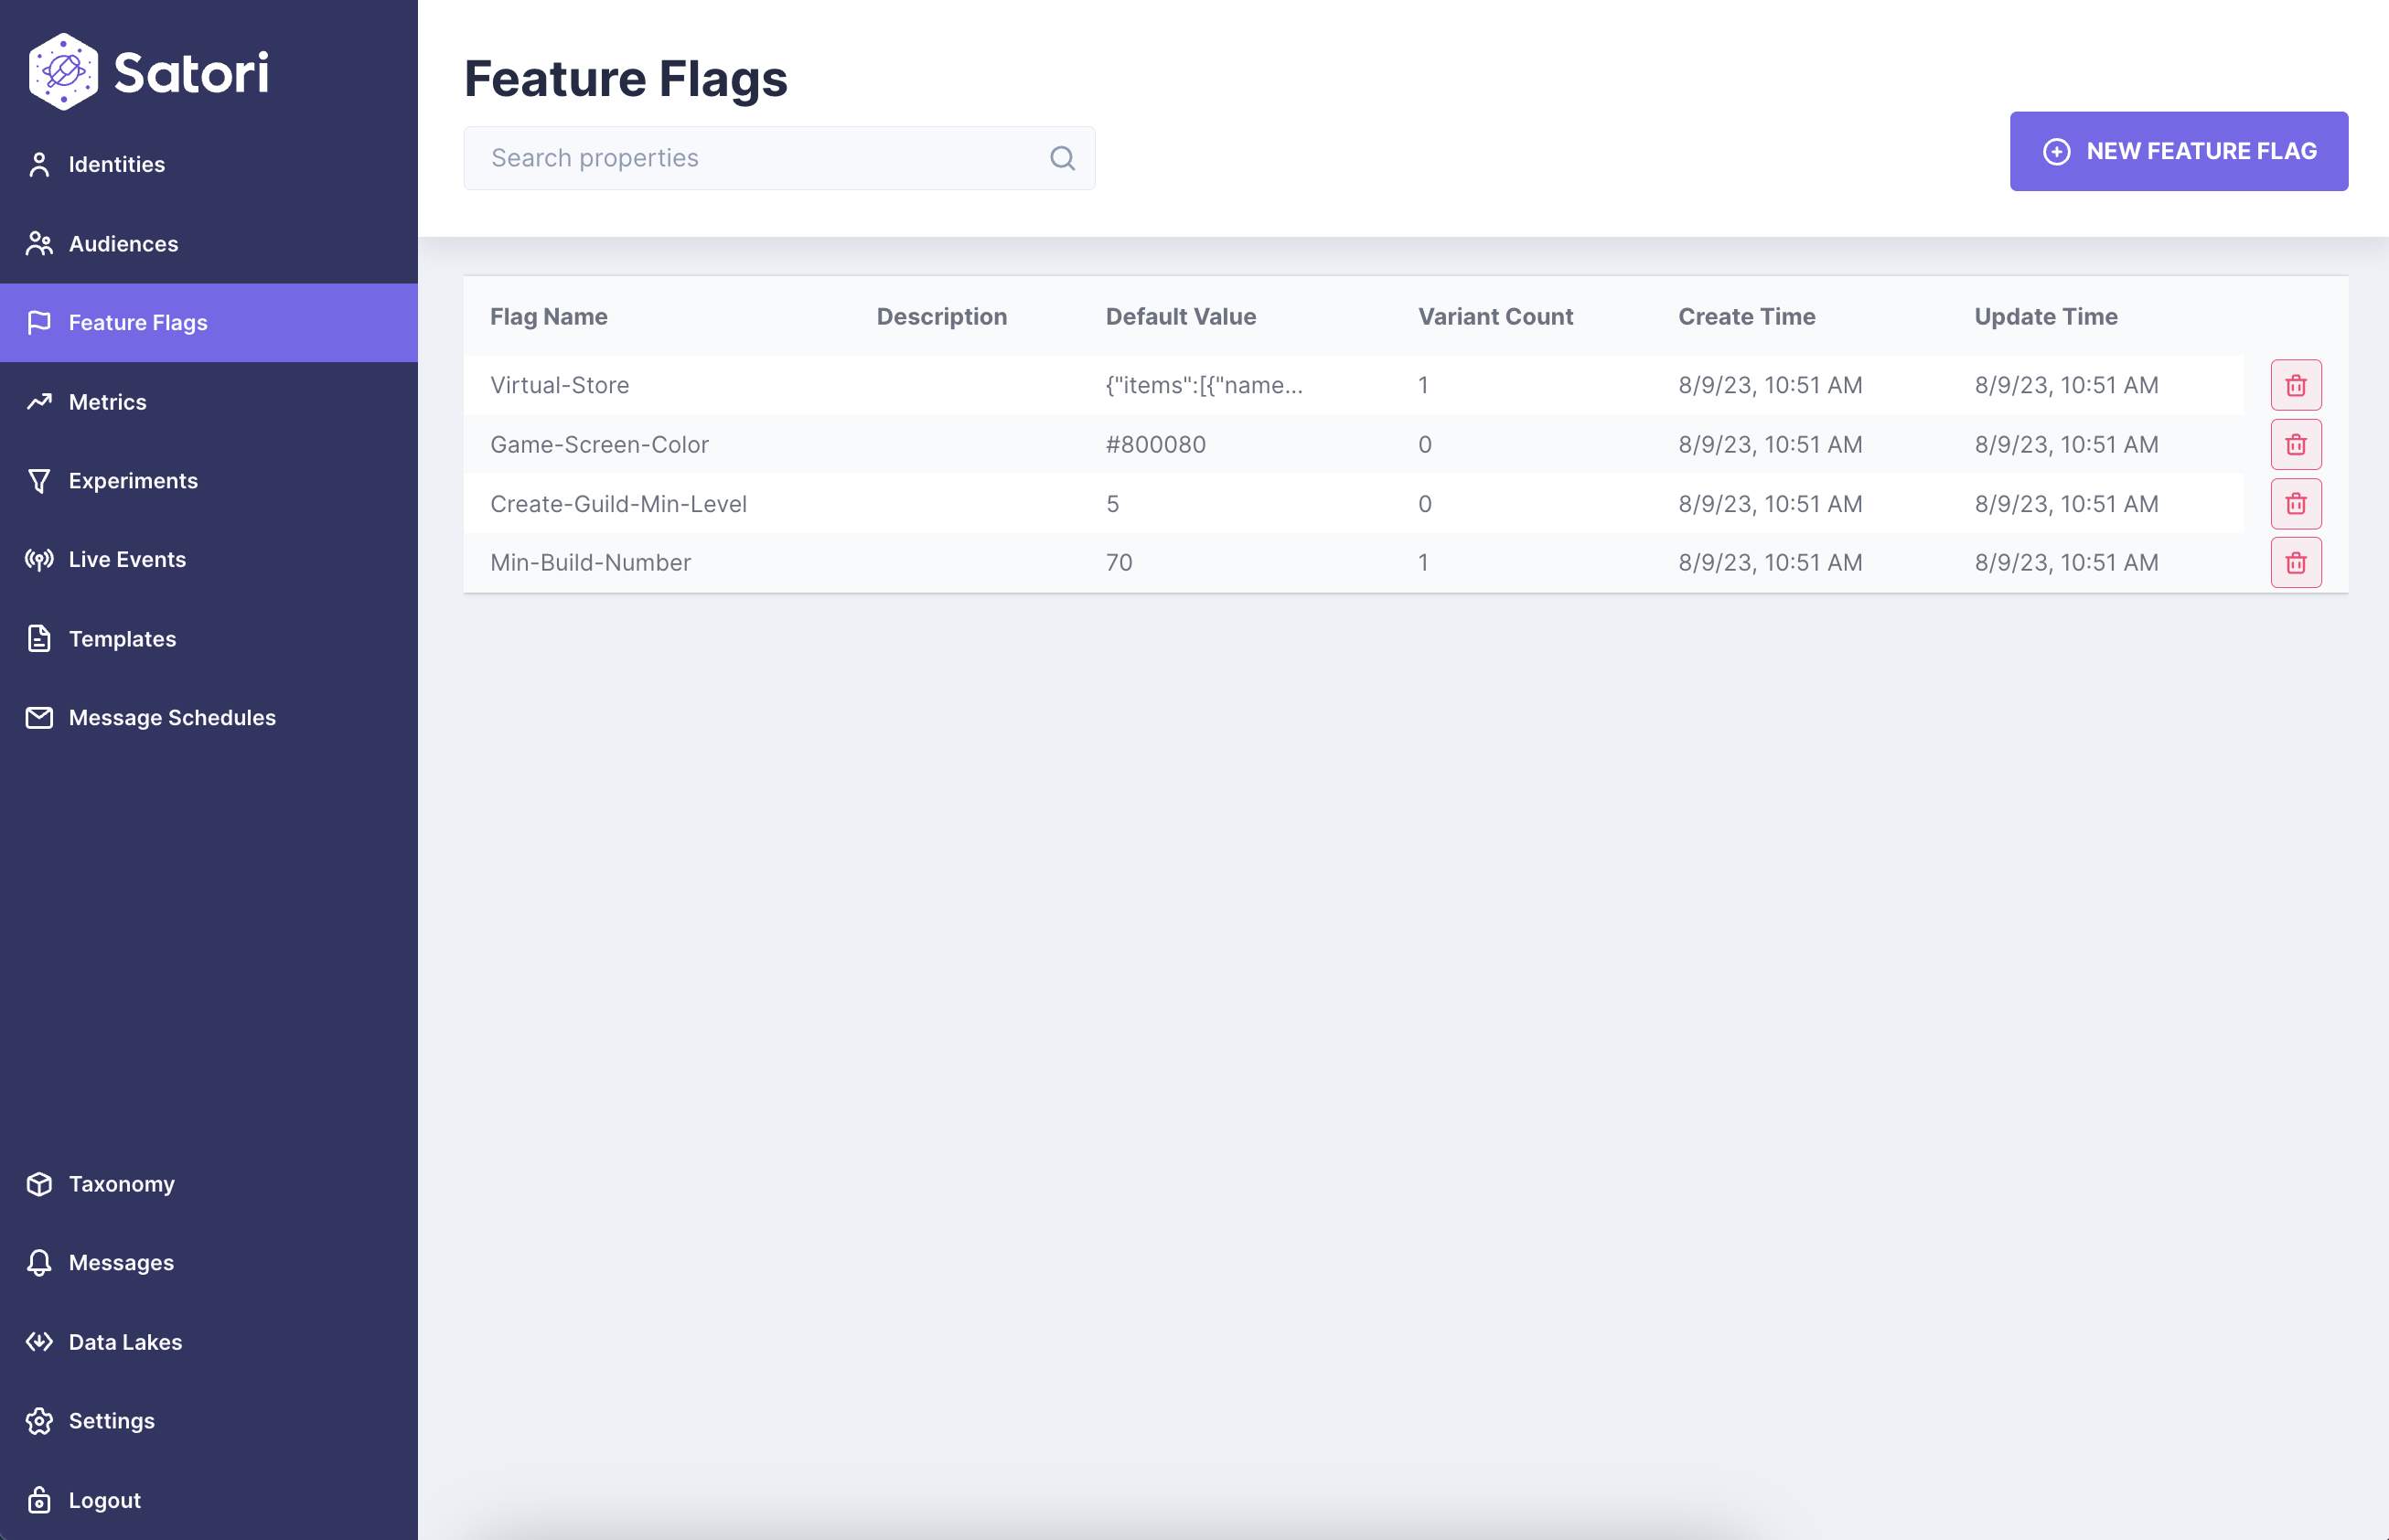 Feature Flags page